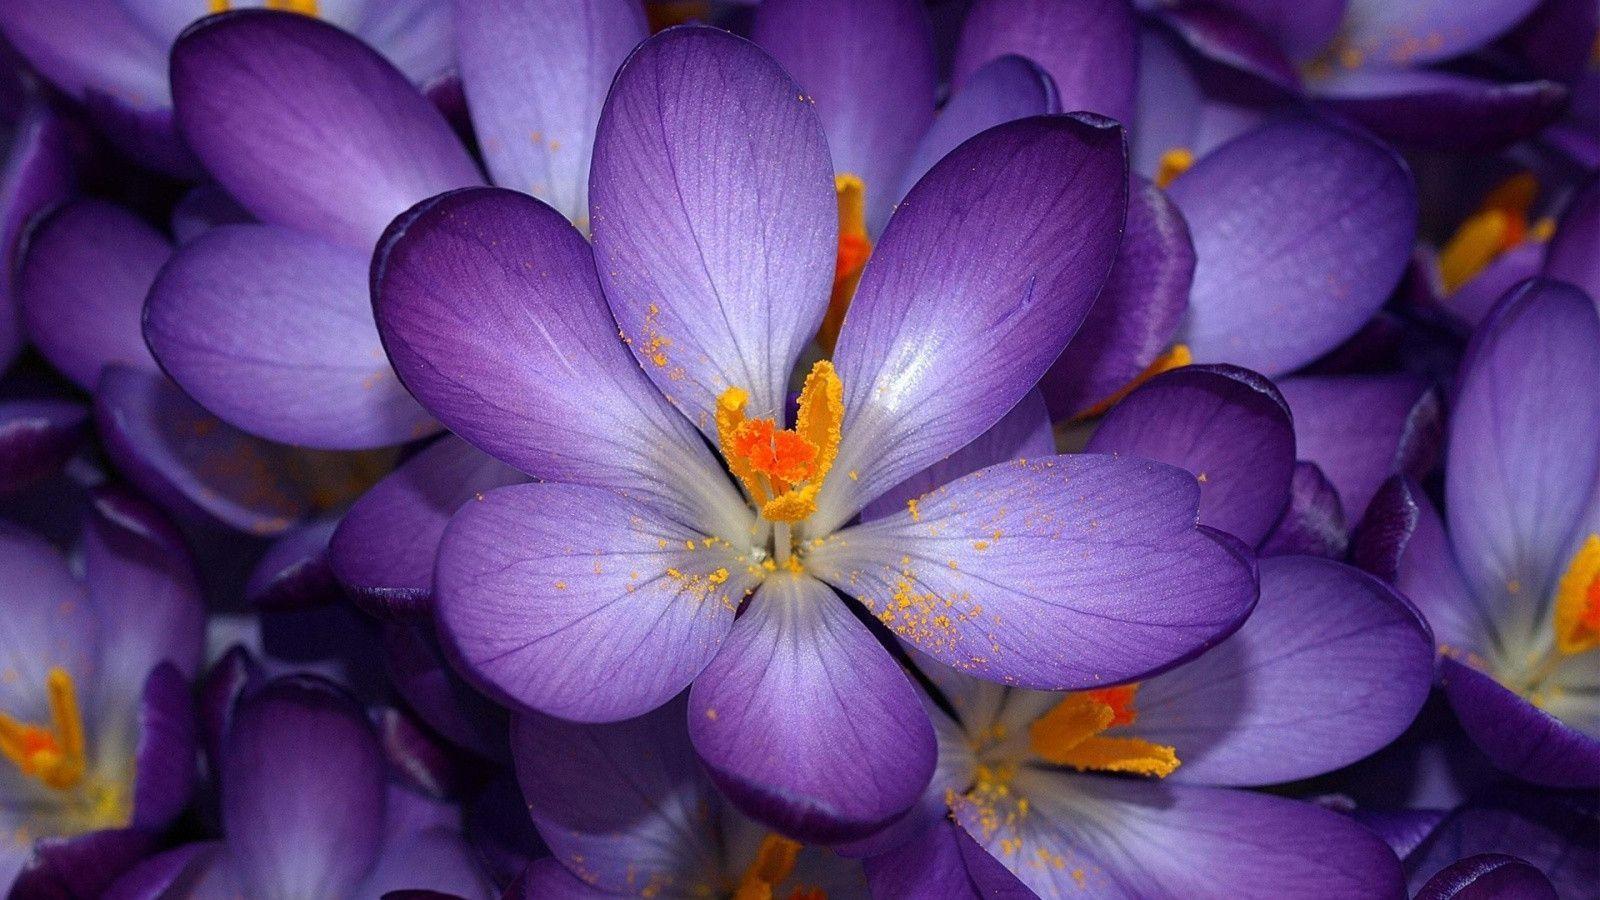 Beautiful purple flowers wallpaper, Calming and many